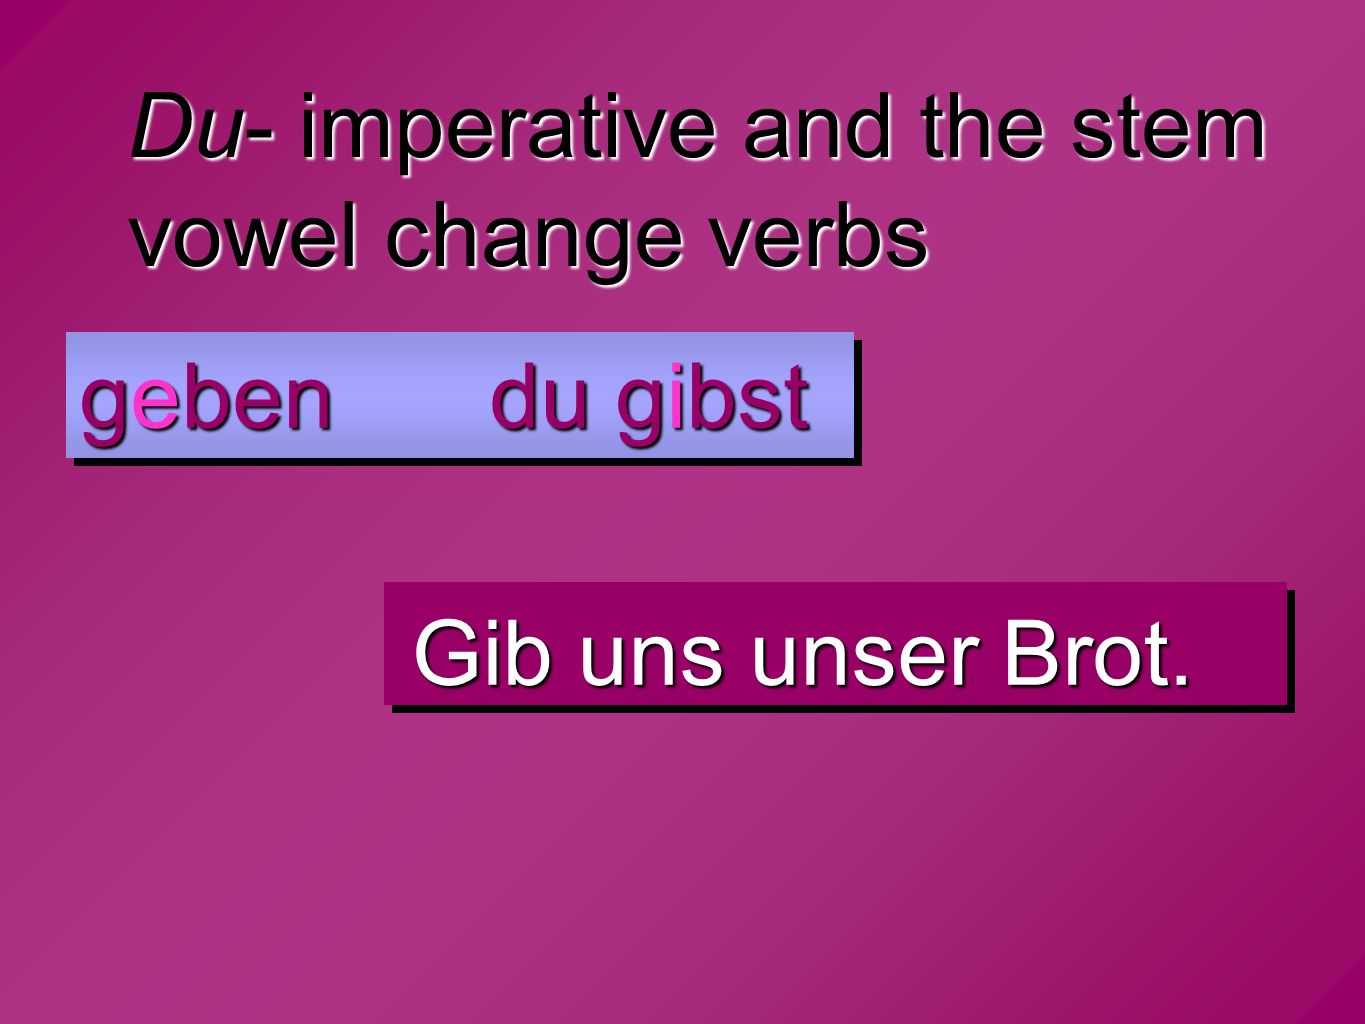 Du- imperative and the stem vowel change verbs